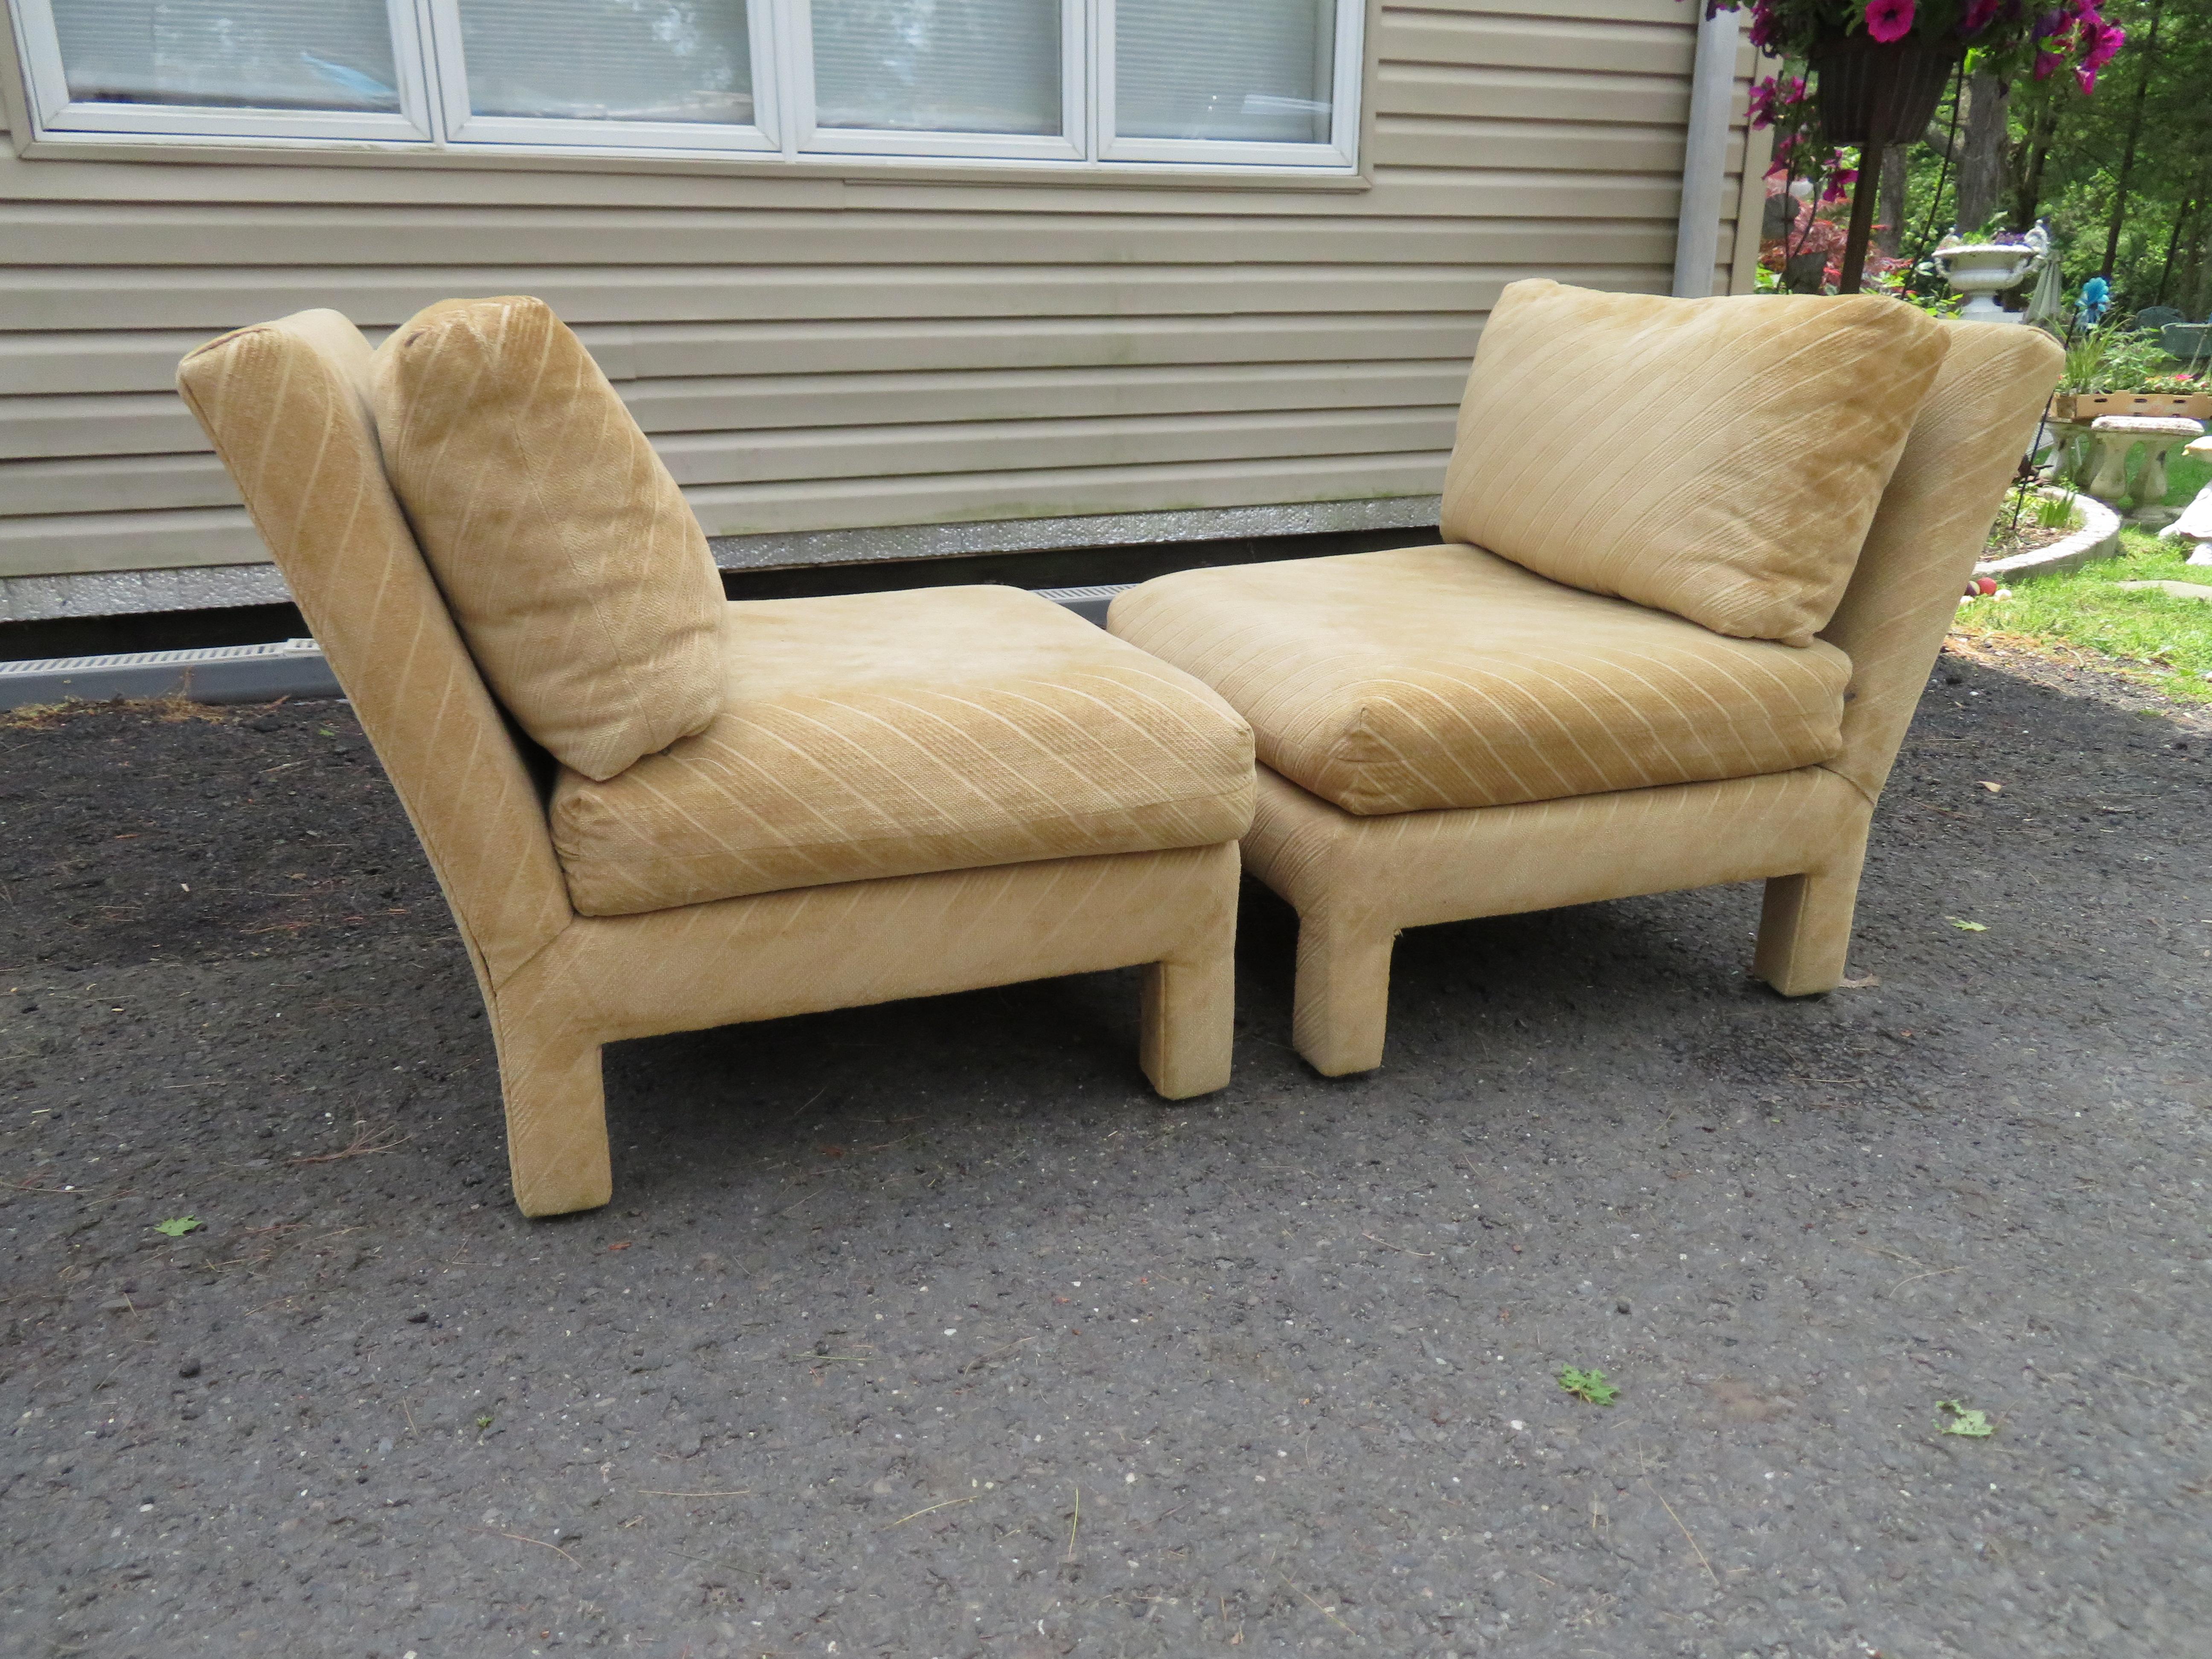 Lovely pair of Milo Baughman style upholstered Parson slipper chairs. These chairs retain their original tan striped cut velvet upholstery in usable condition. They measure 29